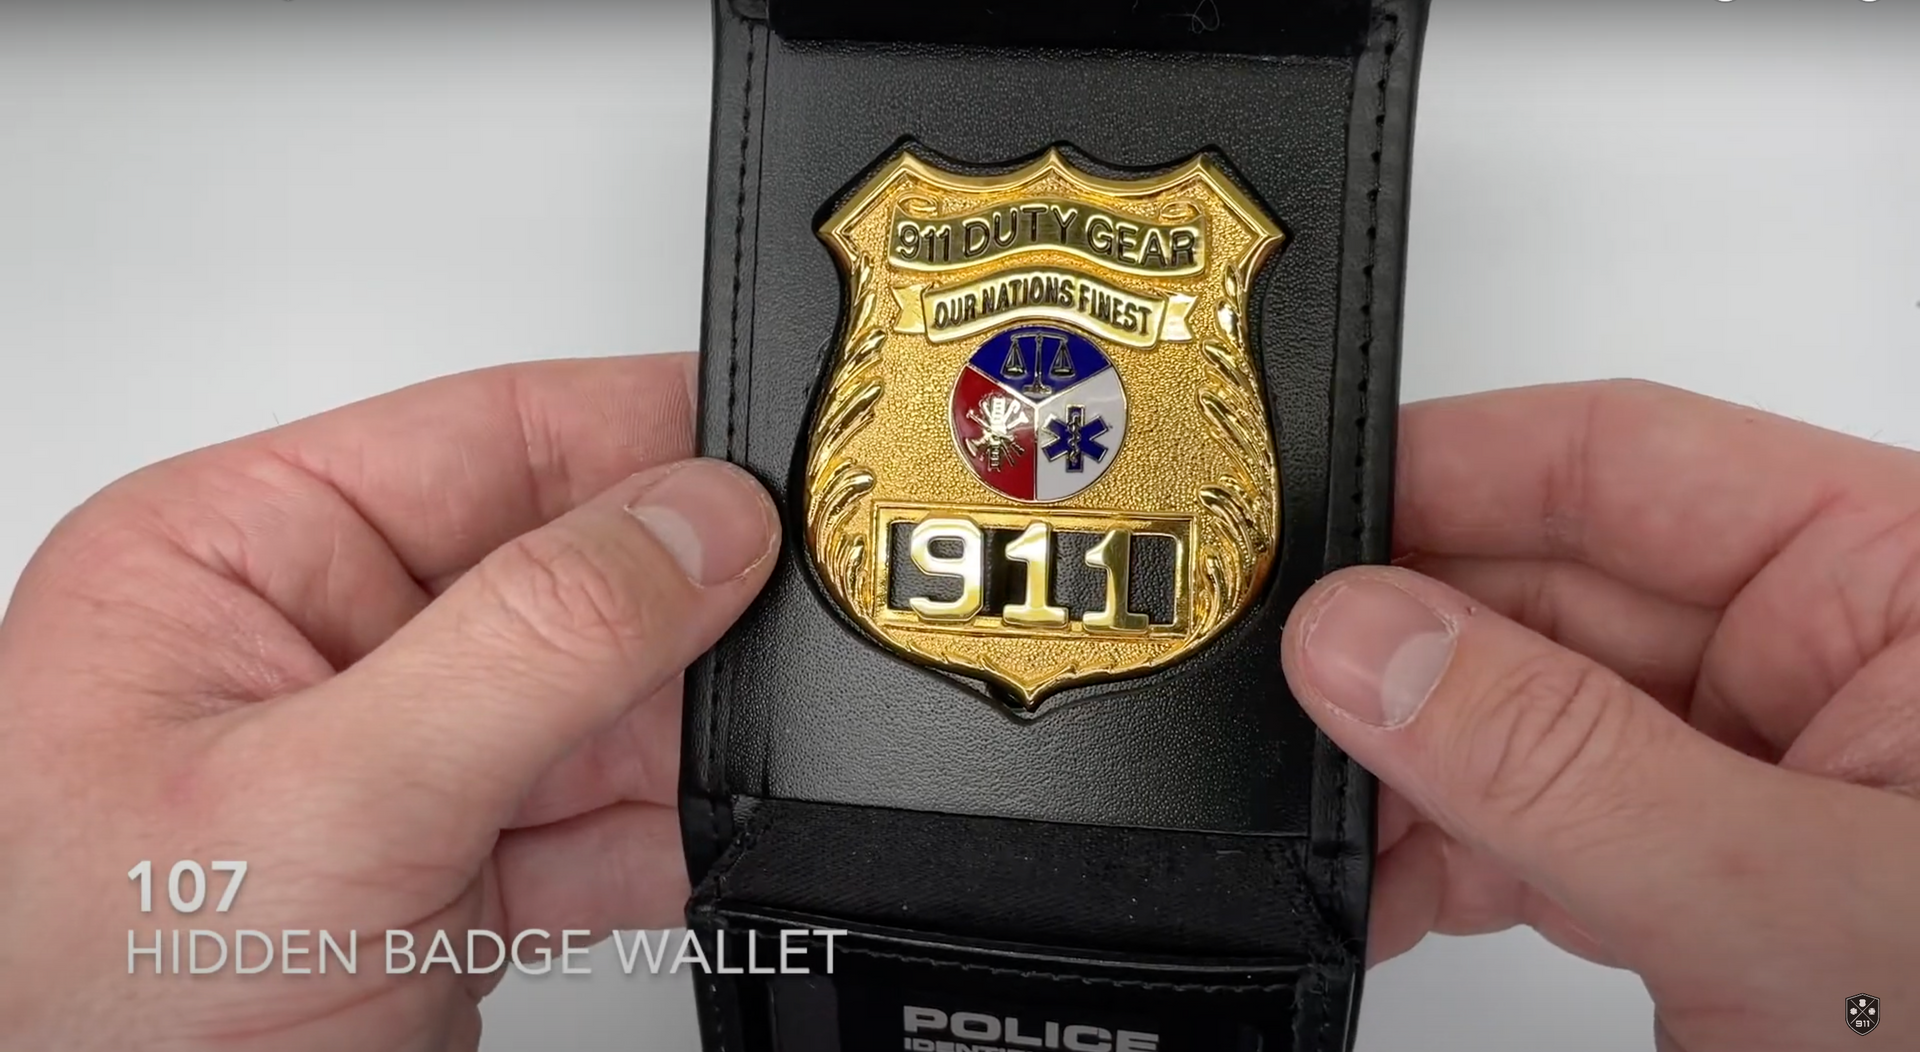 Load video: 911 Duty Gear Product Badge Wallet USA American product video Youtube